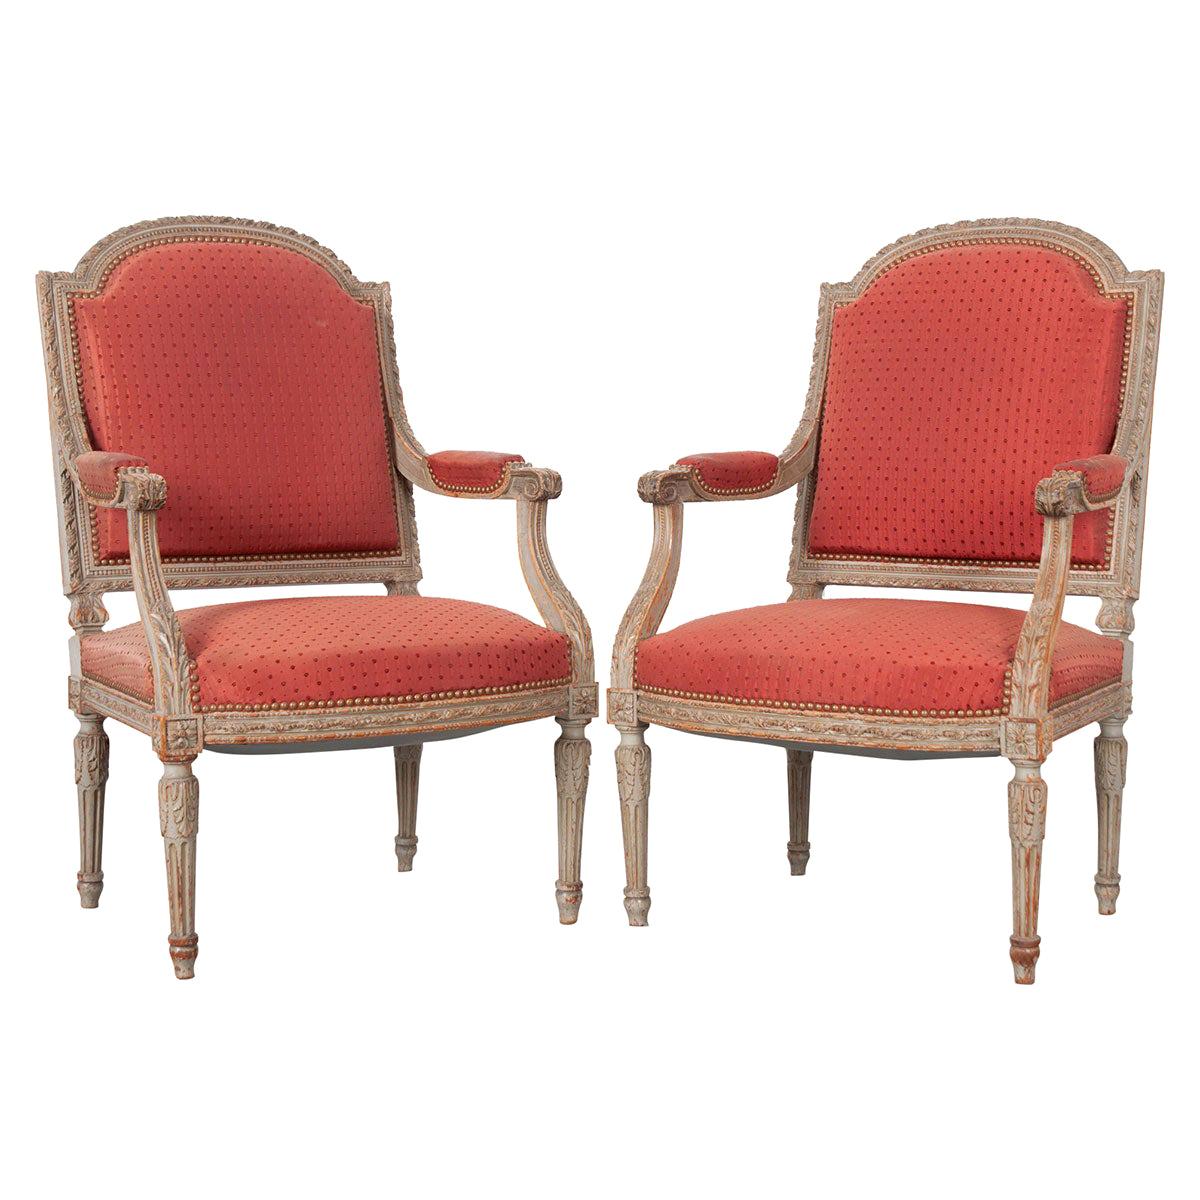 Pair of French 19th Century Louis XVI-Style Fauteuils